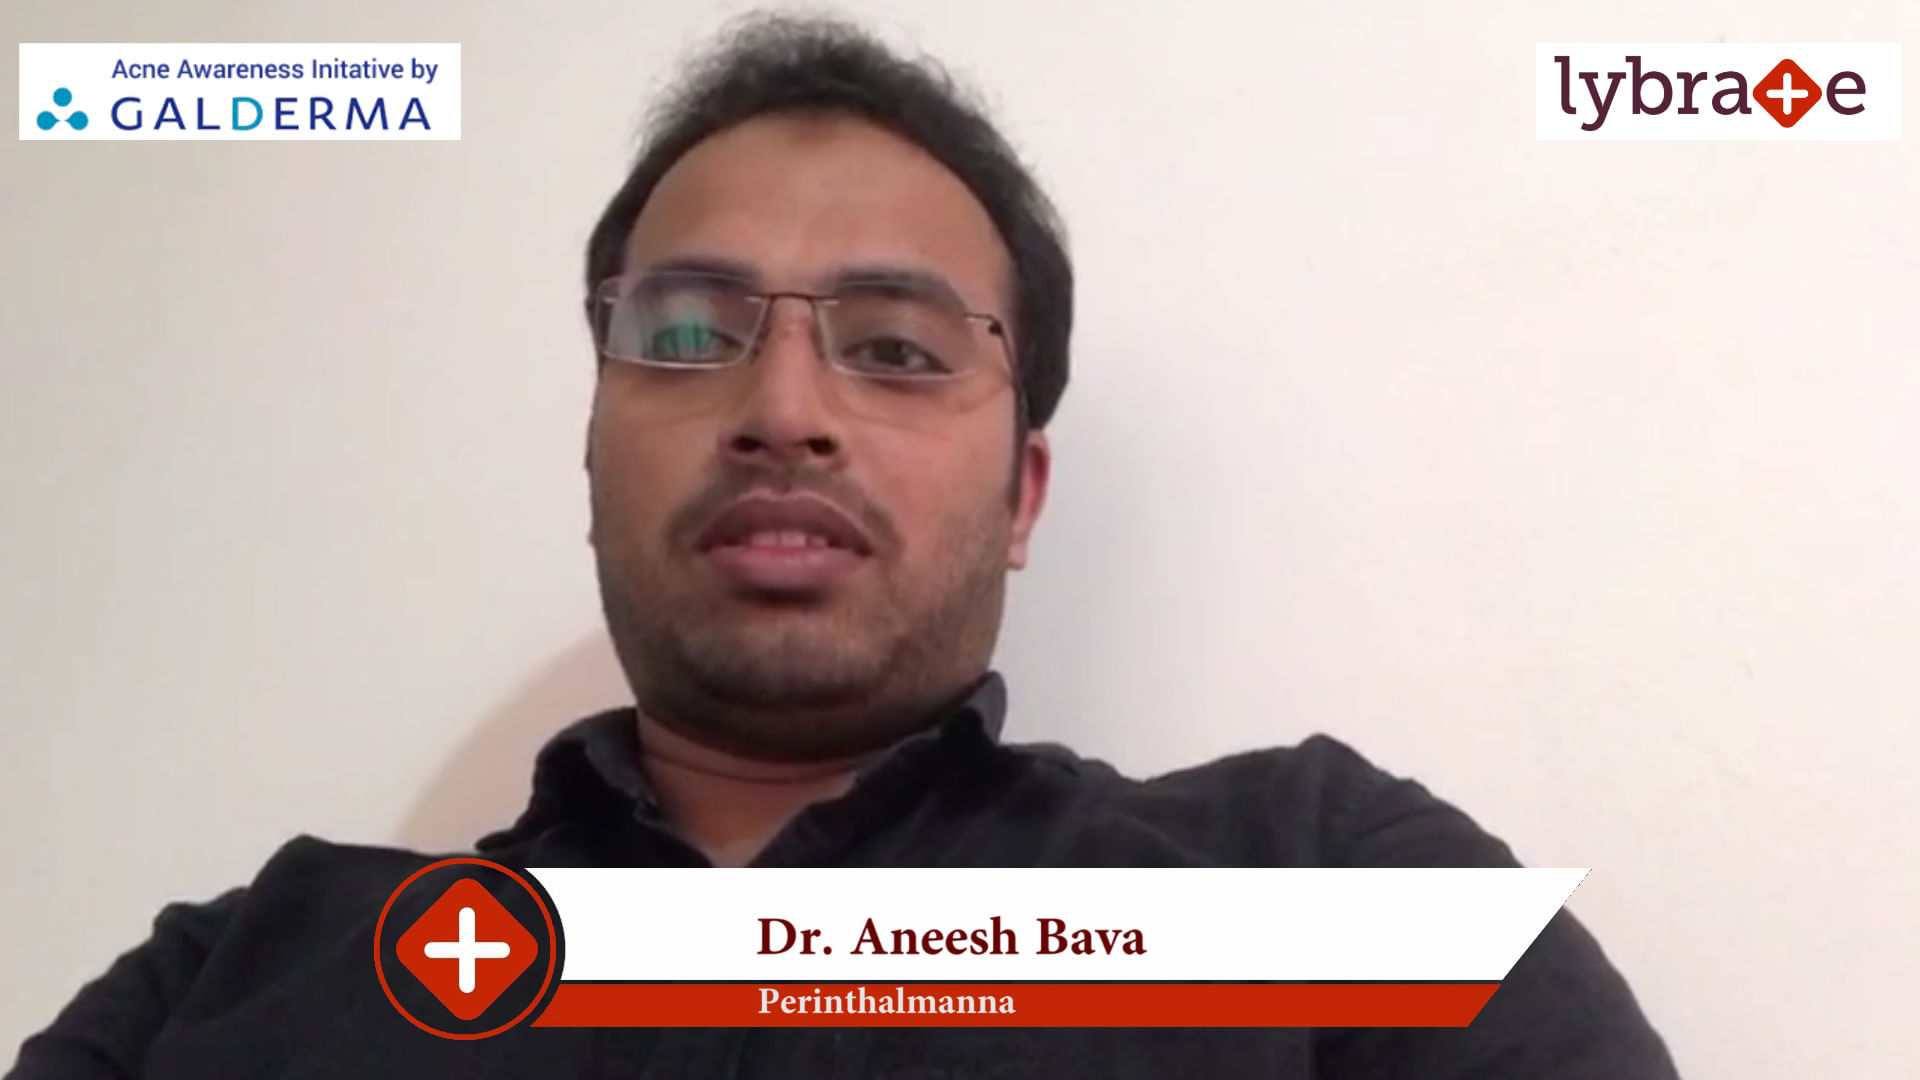 Lybrate | Dr. Aneesh Bava speaks on IMPORTANCE OF TREATING ACNE EARLY